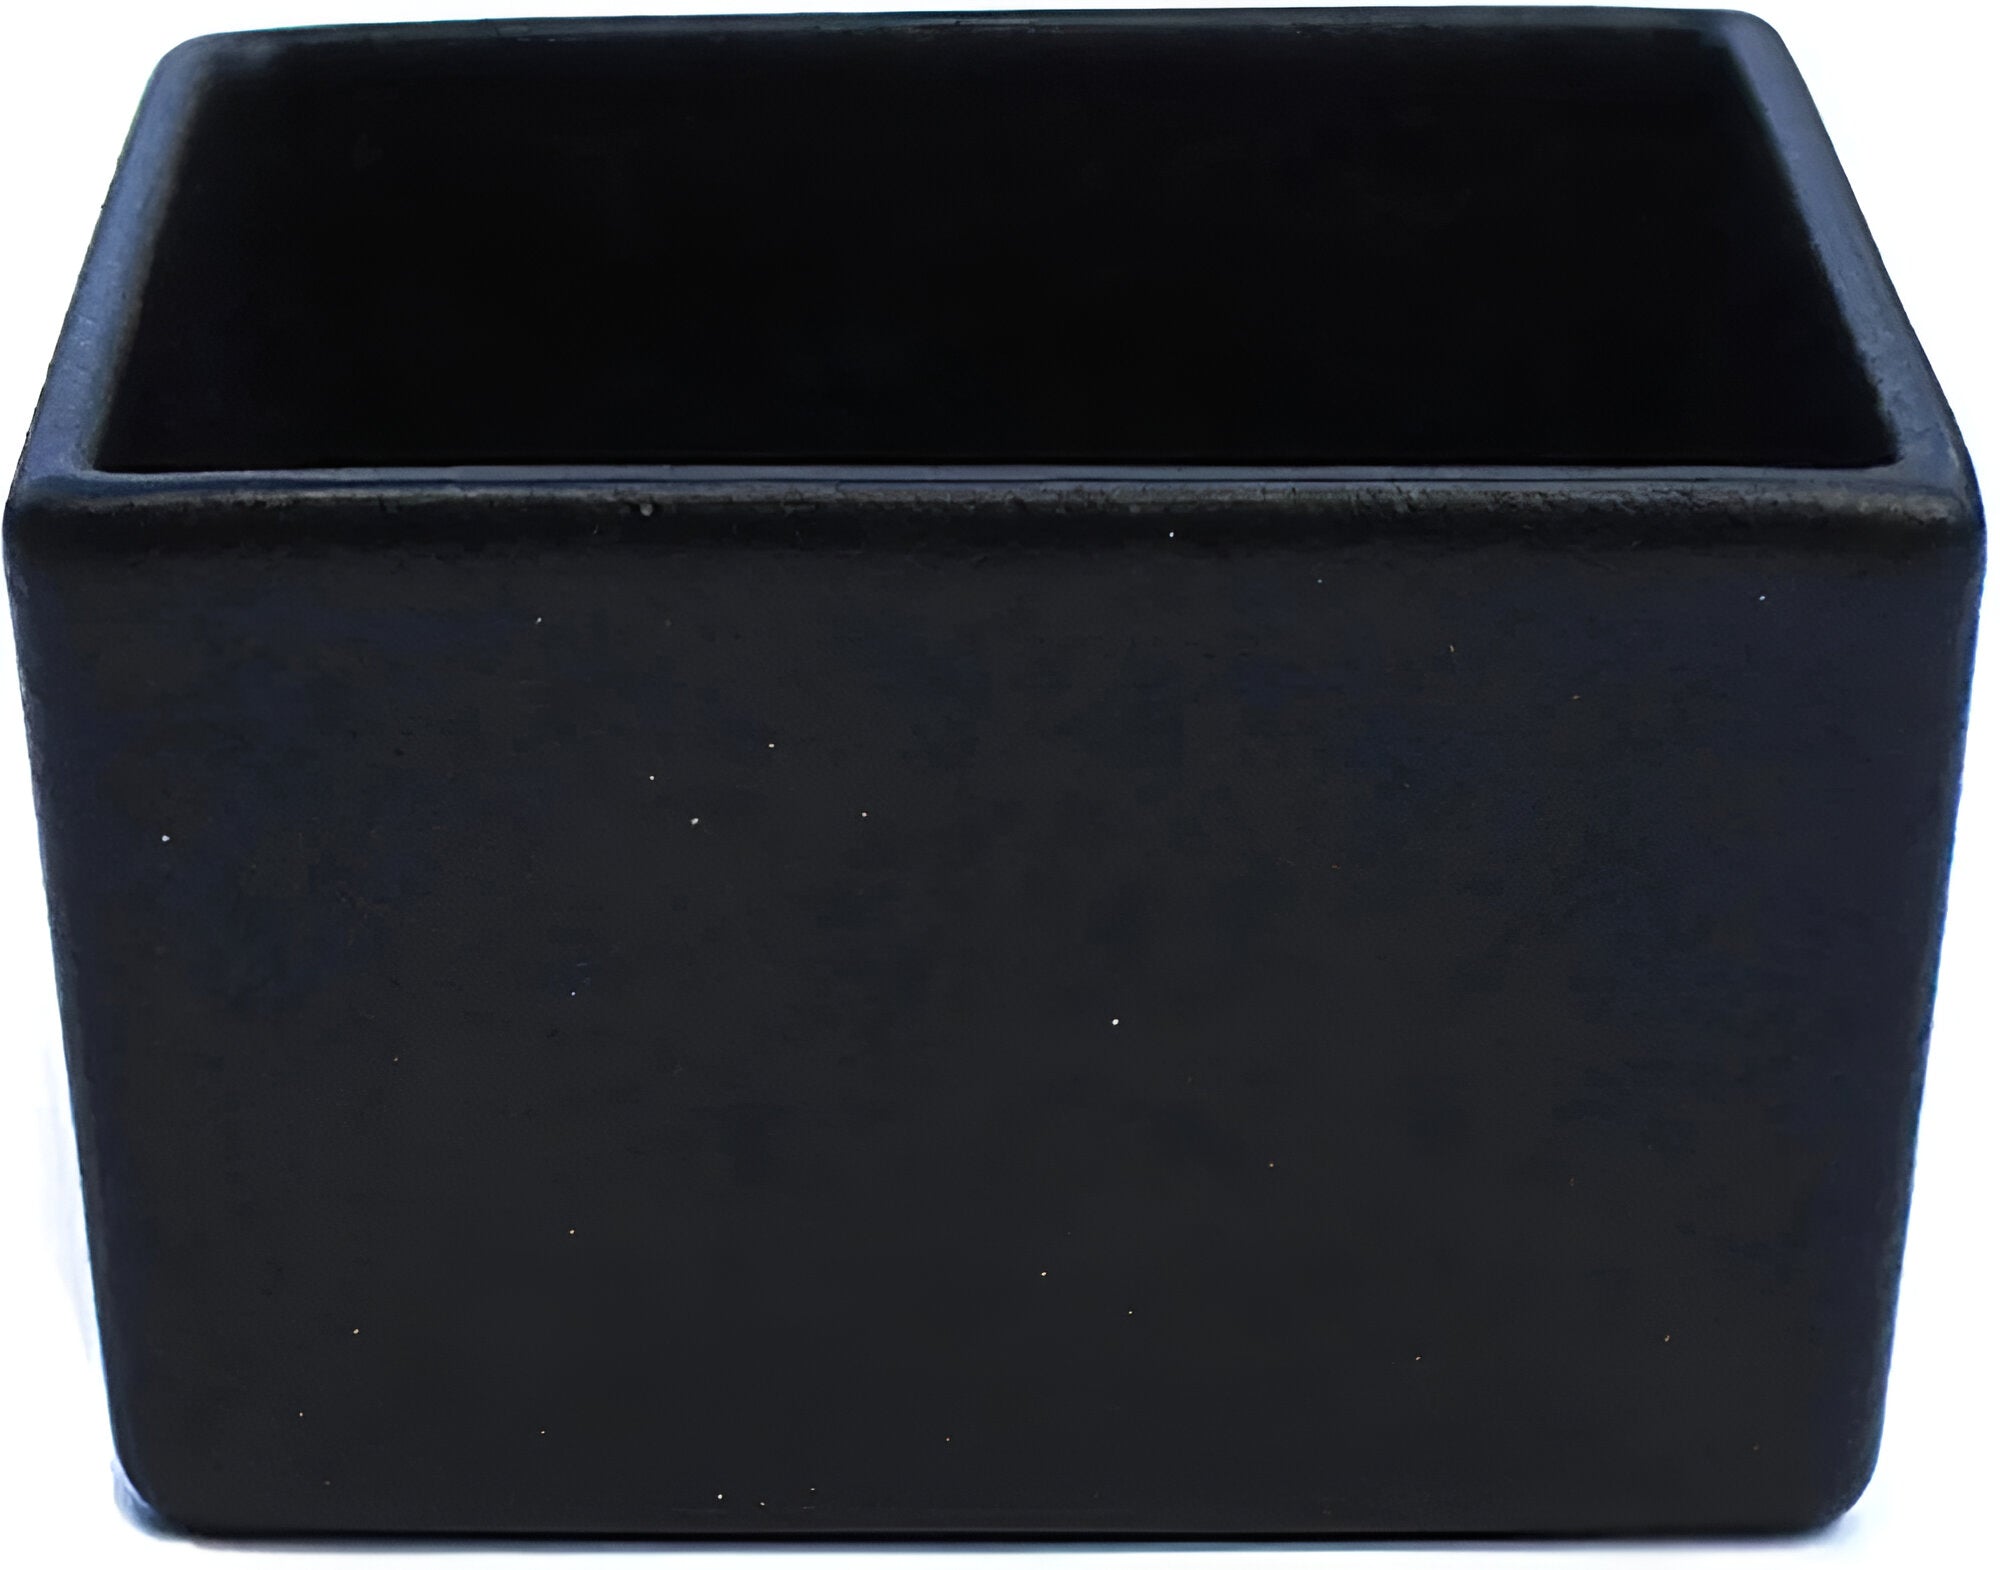 Bugambilia - Mod 42.88 OZ Black Square Straight Sided Salad Bowl With Glossy Smooth Finish - COMP20-MOD-BB